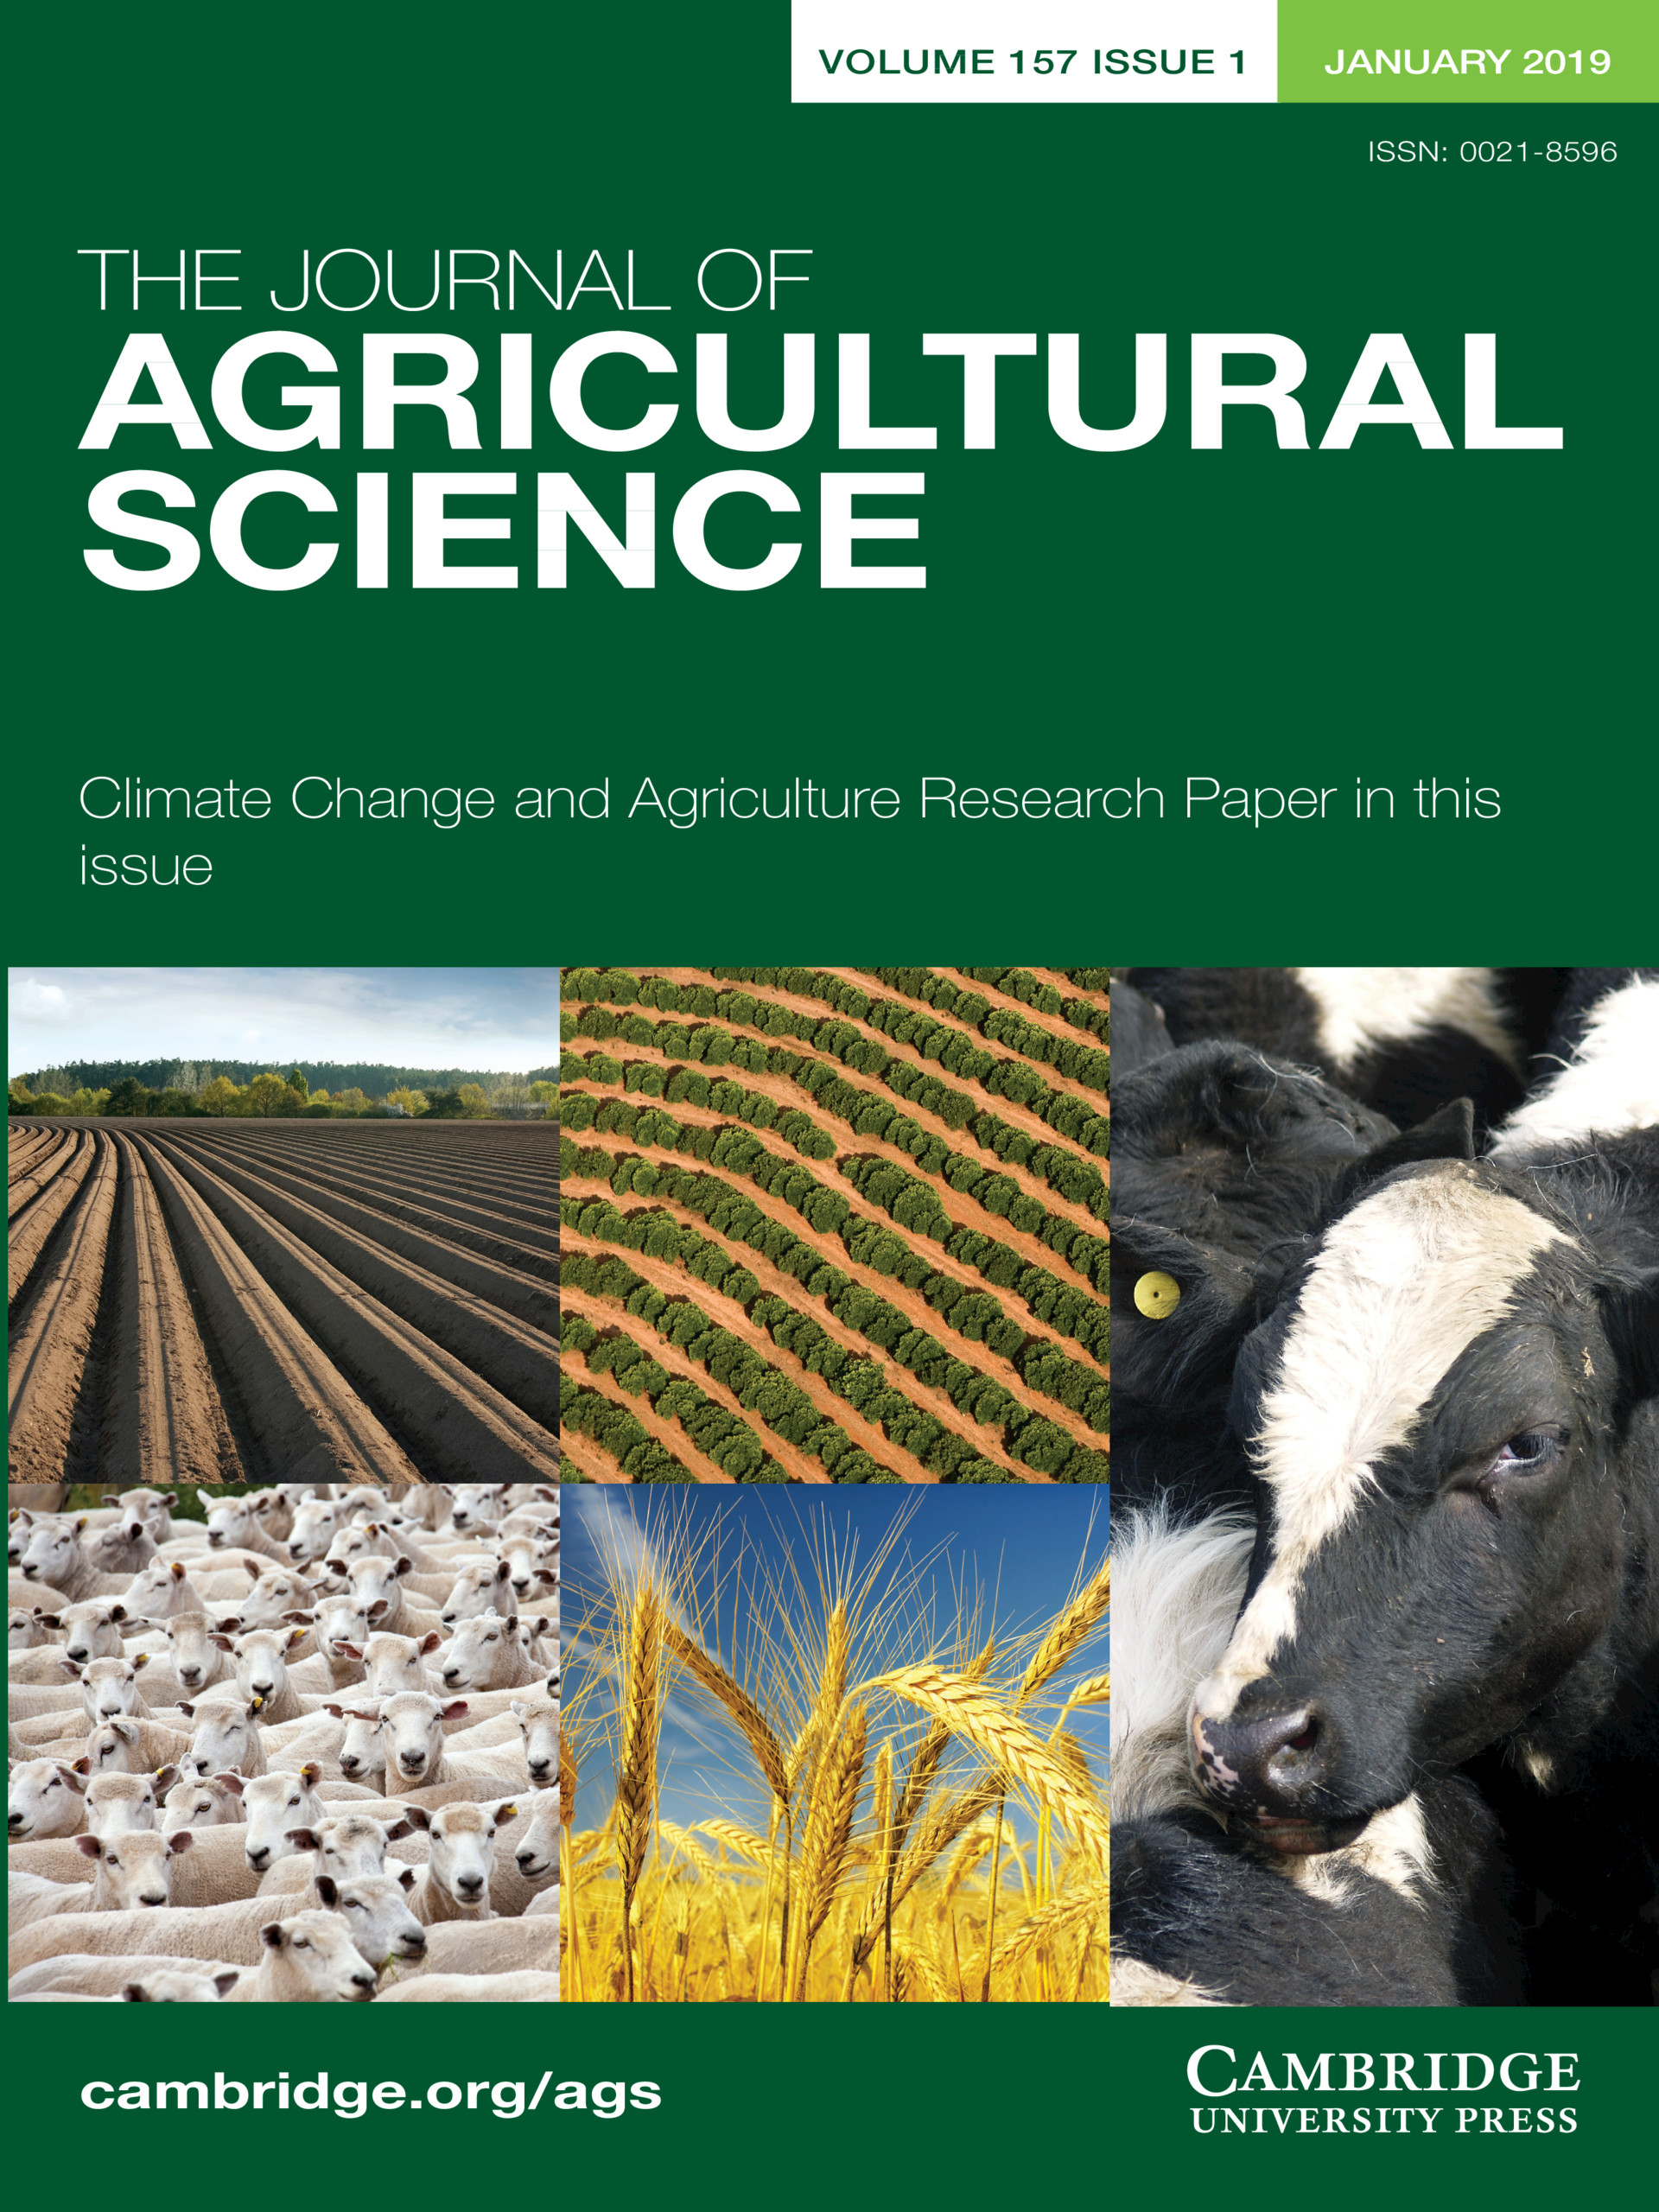 The Journal of Agricultural Science Volume 157 Issue 1 Cambridge Core